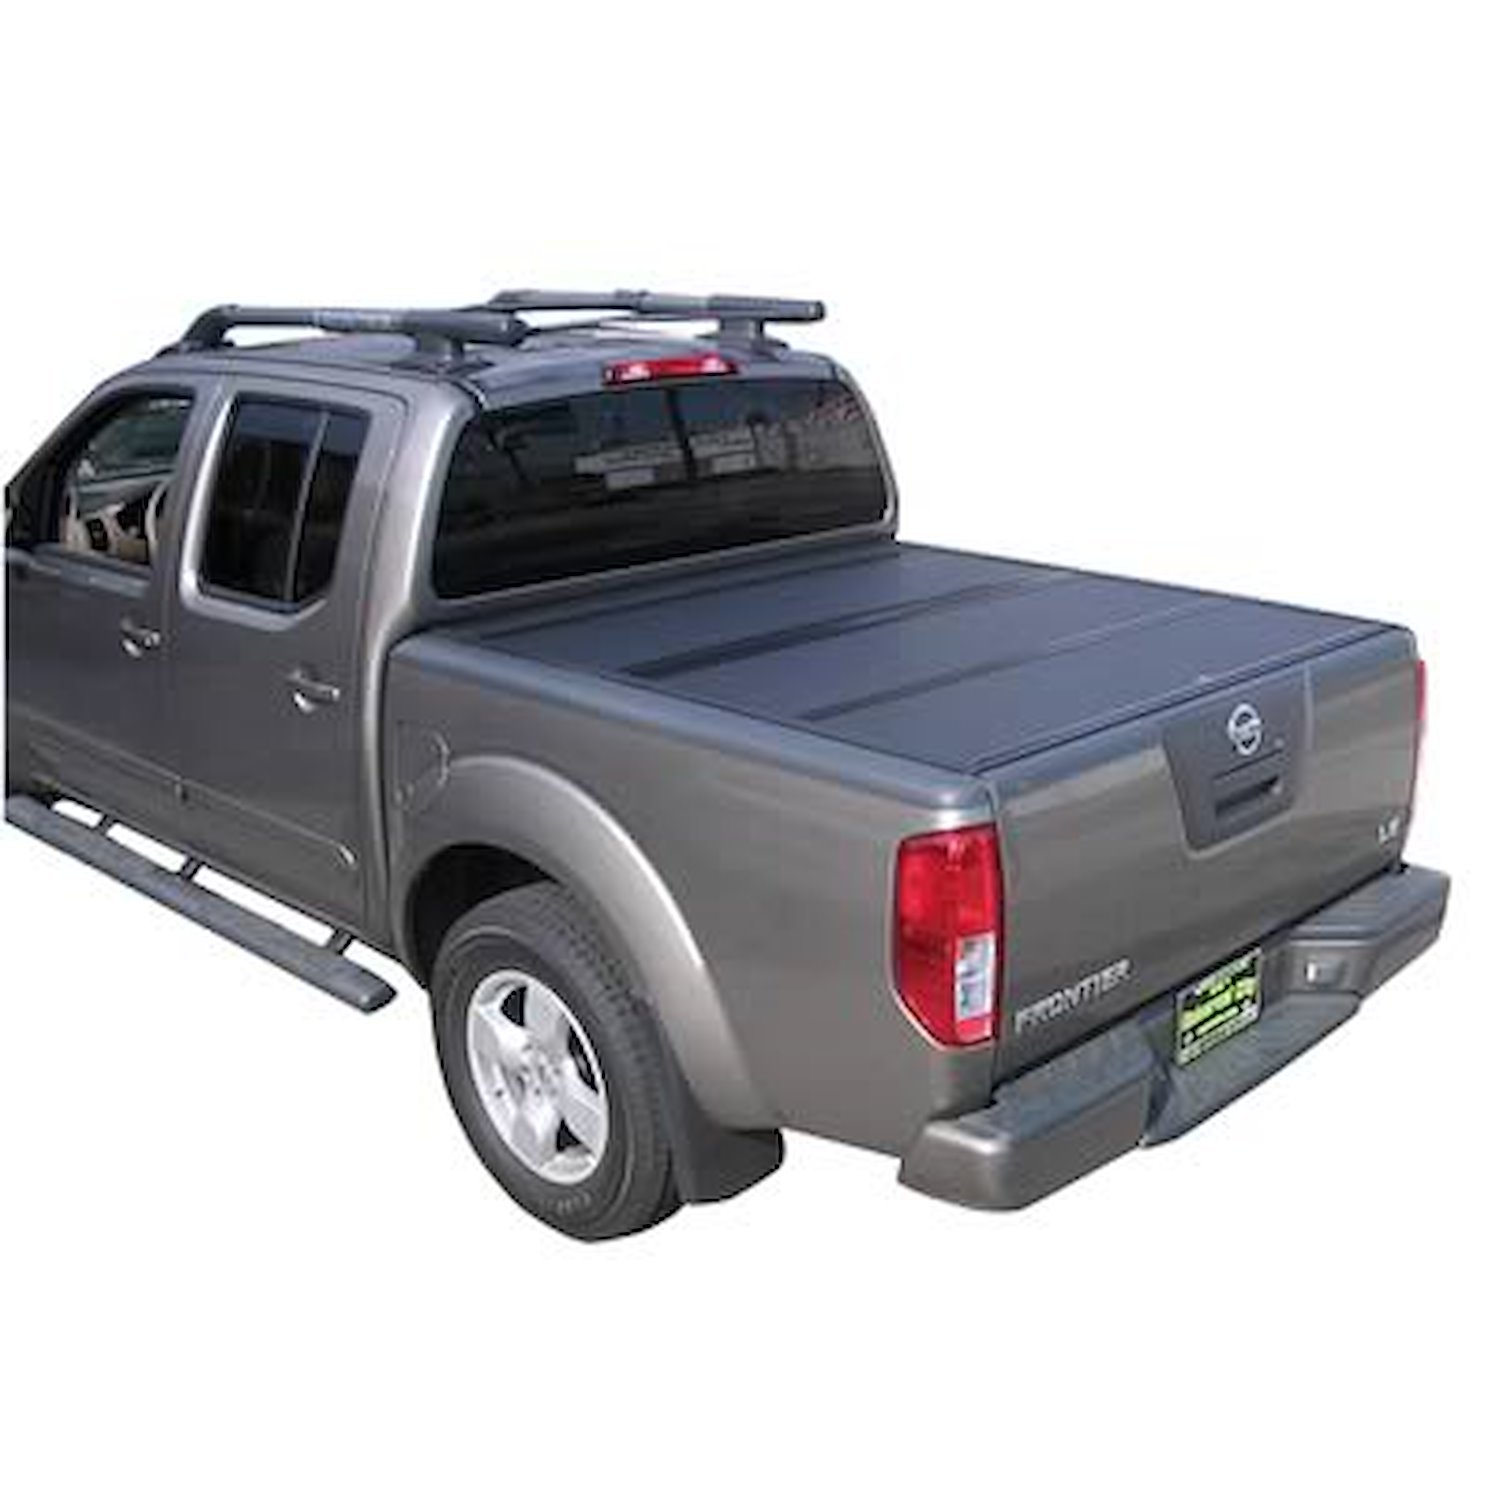 226502 BAKFlip G2 for 00-04 Nissan Frontier King Cab/Crew Cab 4 Door 6.3 ft. Bed, Hard Folding Cover Style [Black Finish]